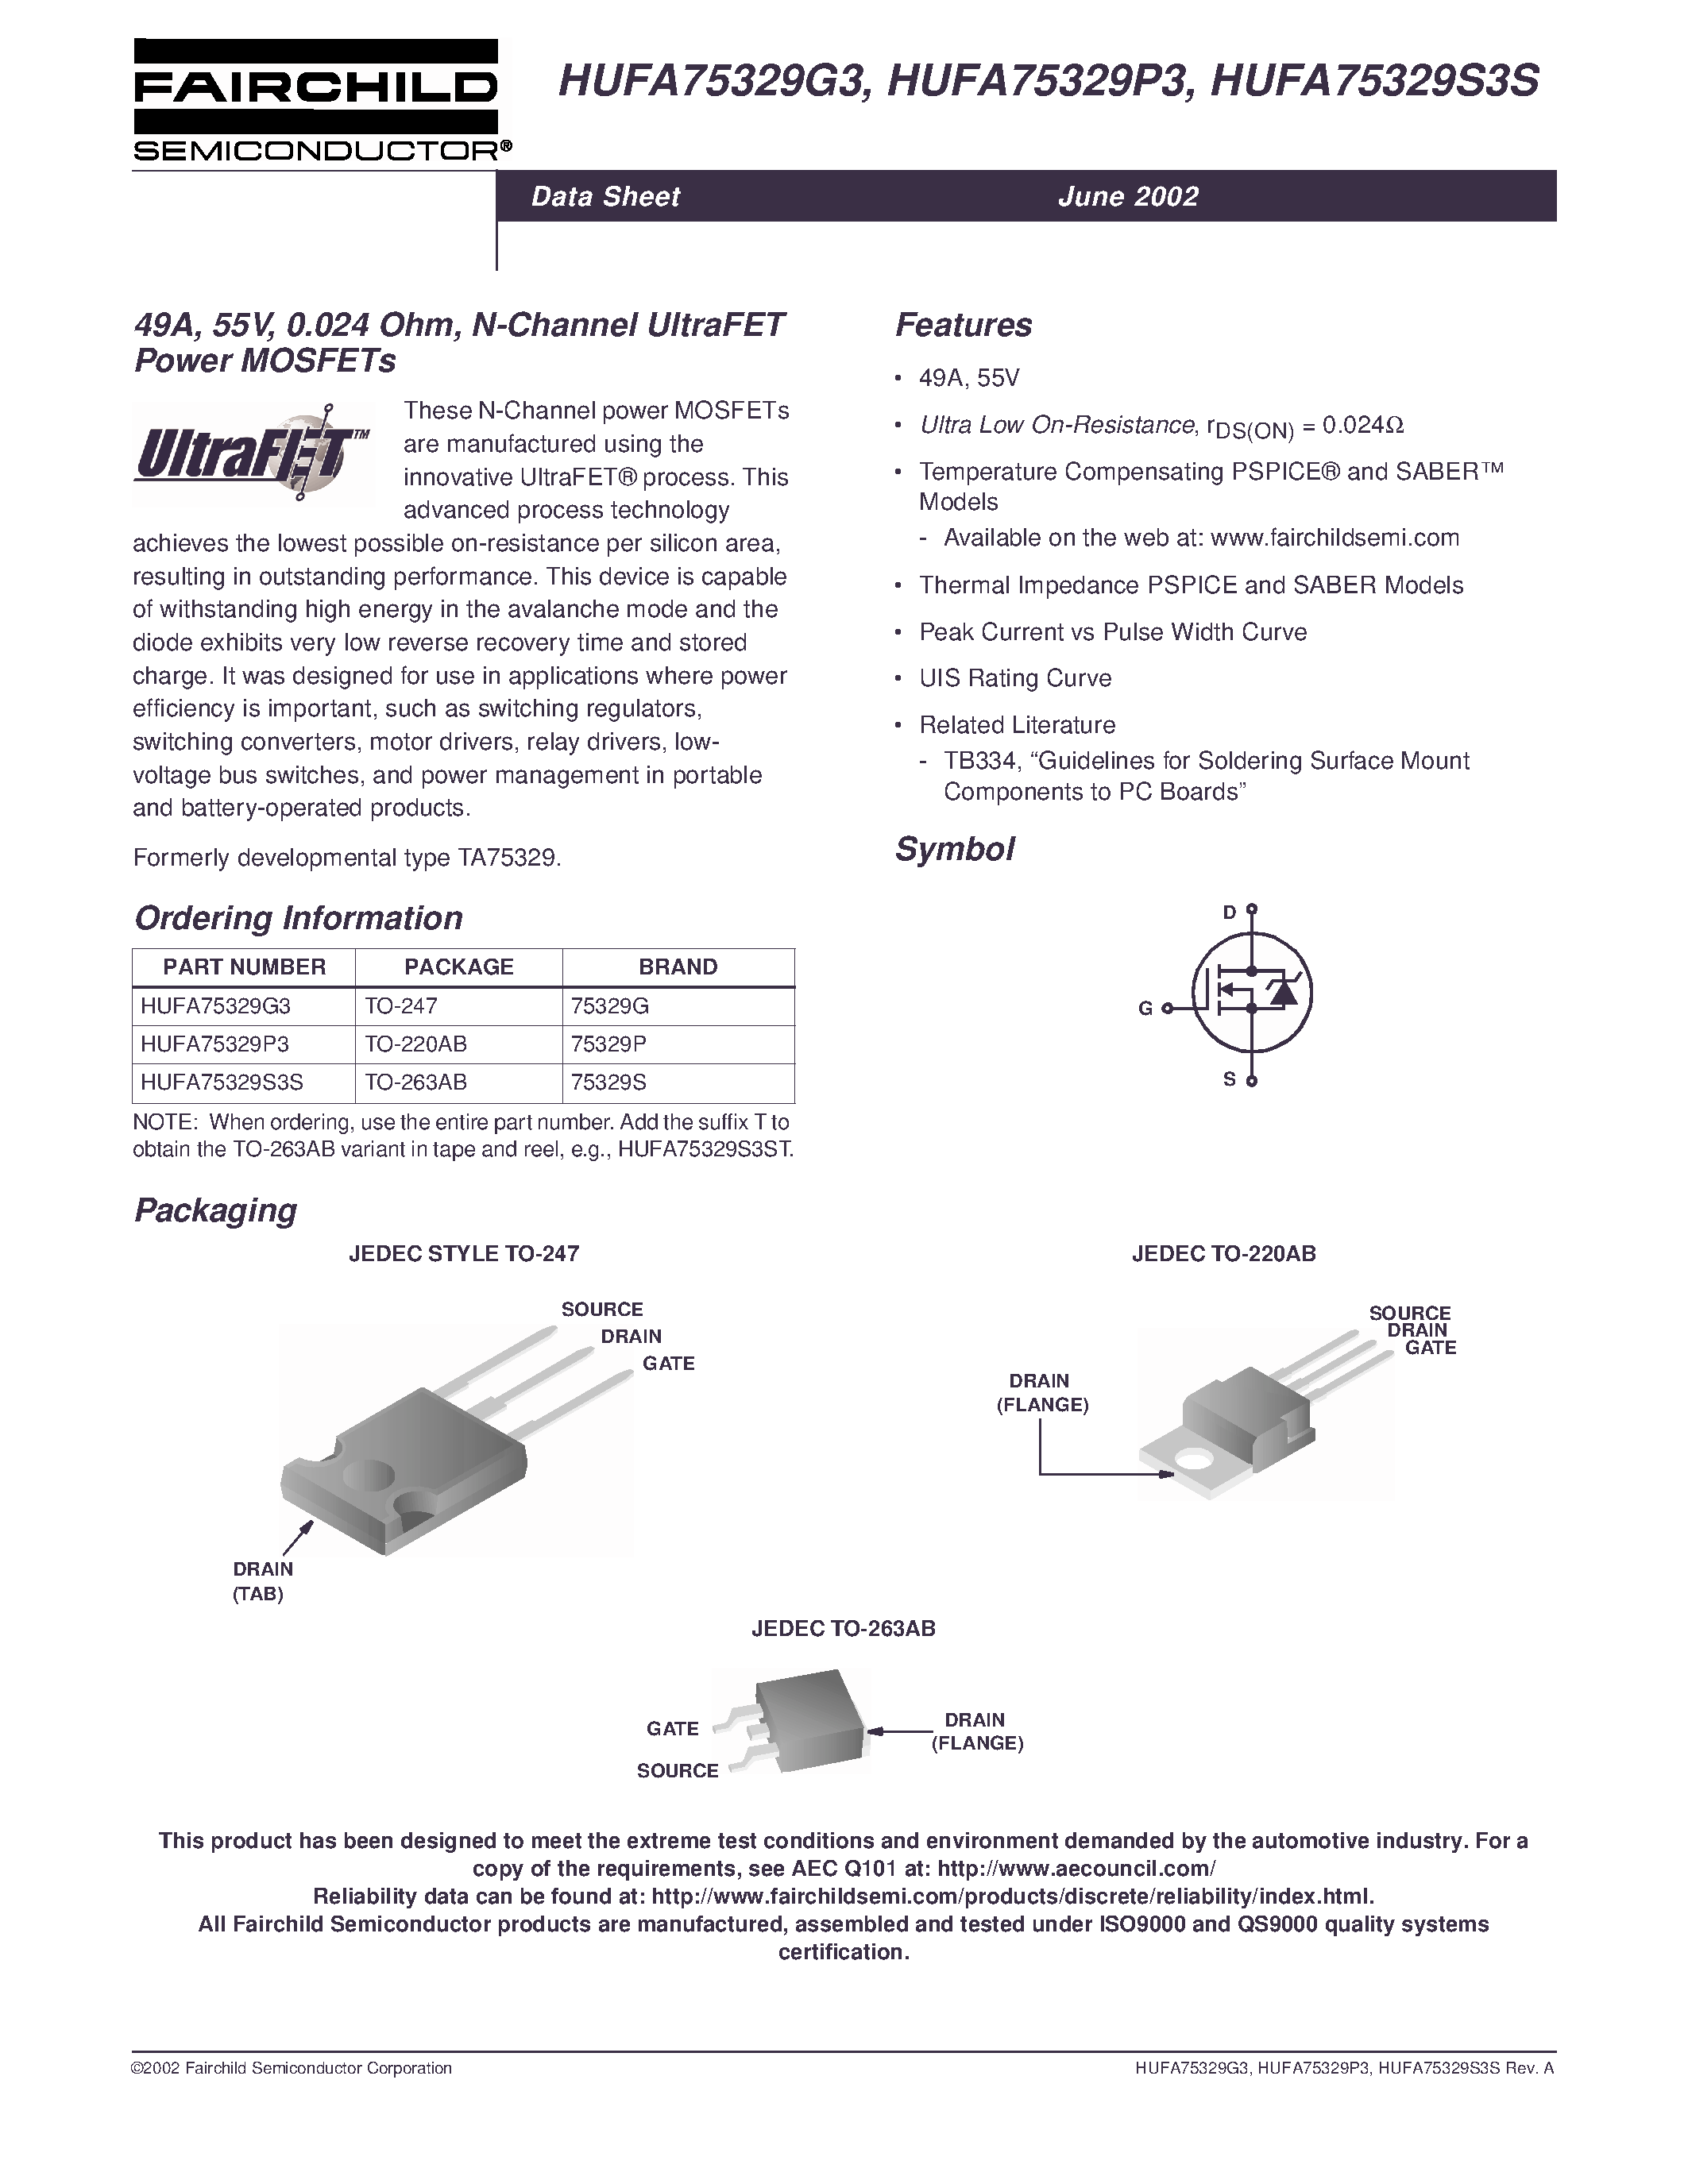 Datasheet HUFA75329G3 - 49A/ 55V/ 0.024 Ohm/ N-Channel UltraFET Power MOSFETs page 1